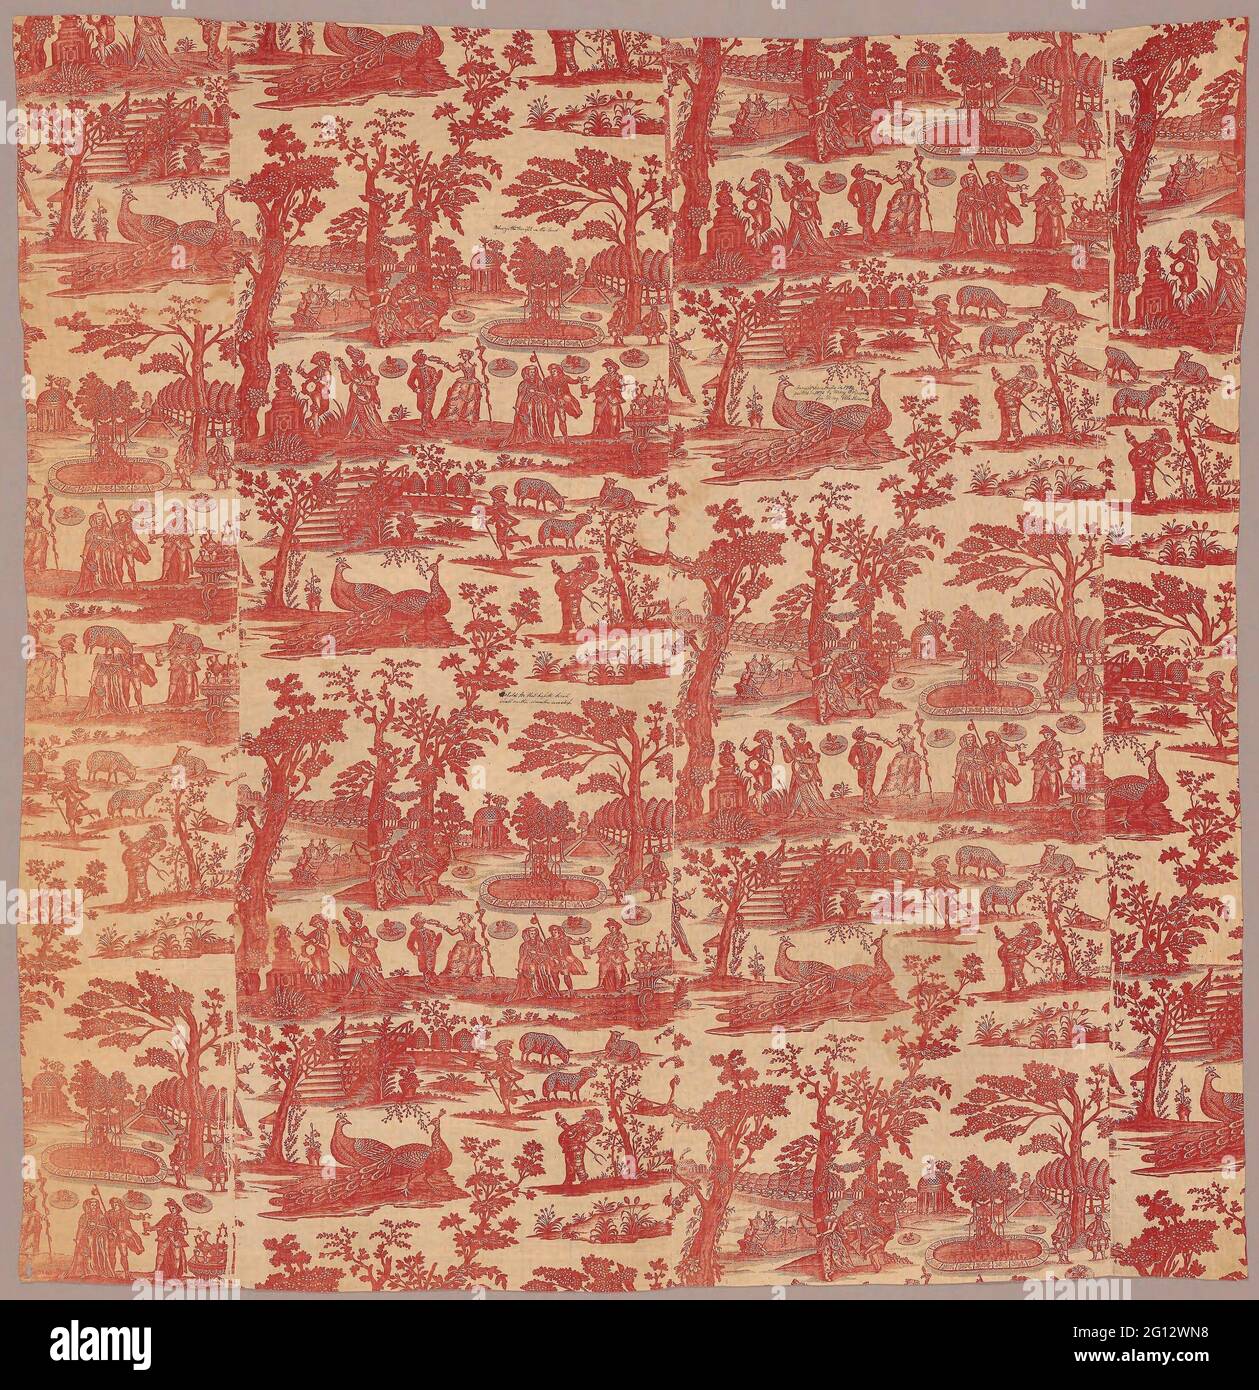 Commedia del - Arte (Furnishing Fabric) - before 1784 - England. Cotton, plain weave; copperplate printed. 1750 - 1784. Stock Photo